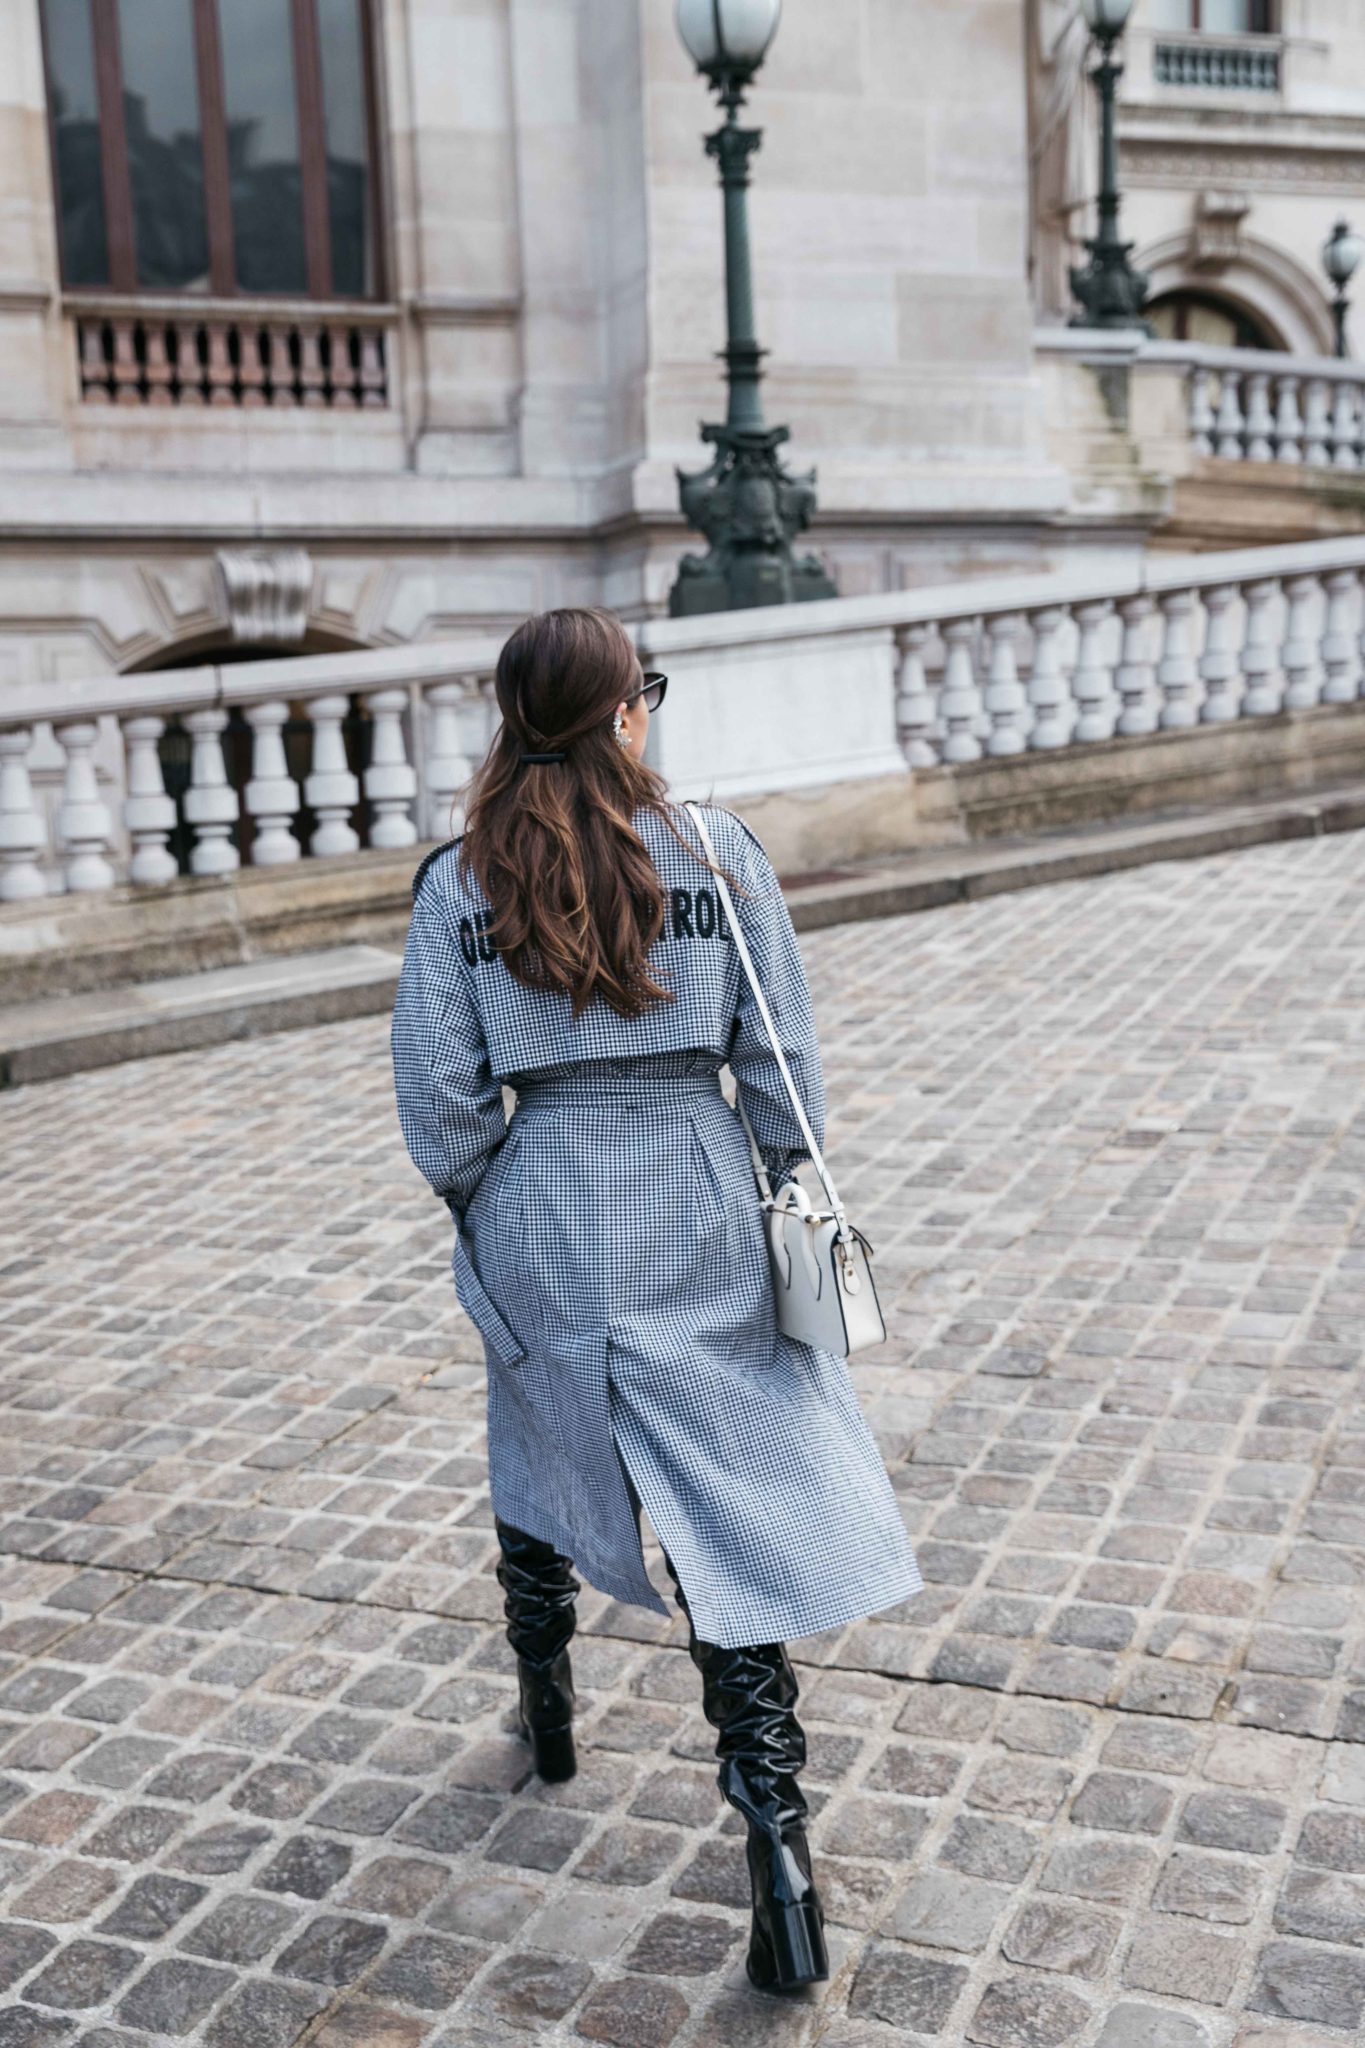 Best Street Style Paris Fashion Week Mars 2018 of Julia Comil / French Fashion Blogger in Los Angeles - Outfit for Leonard Paris Fall Winter 2018 2019 show - gingham spring coat by Mo&Co - Patent over the knee boots by Aldo - Strathberry bag - Shot in Paris Palais Garnier